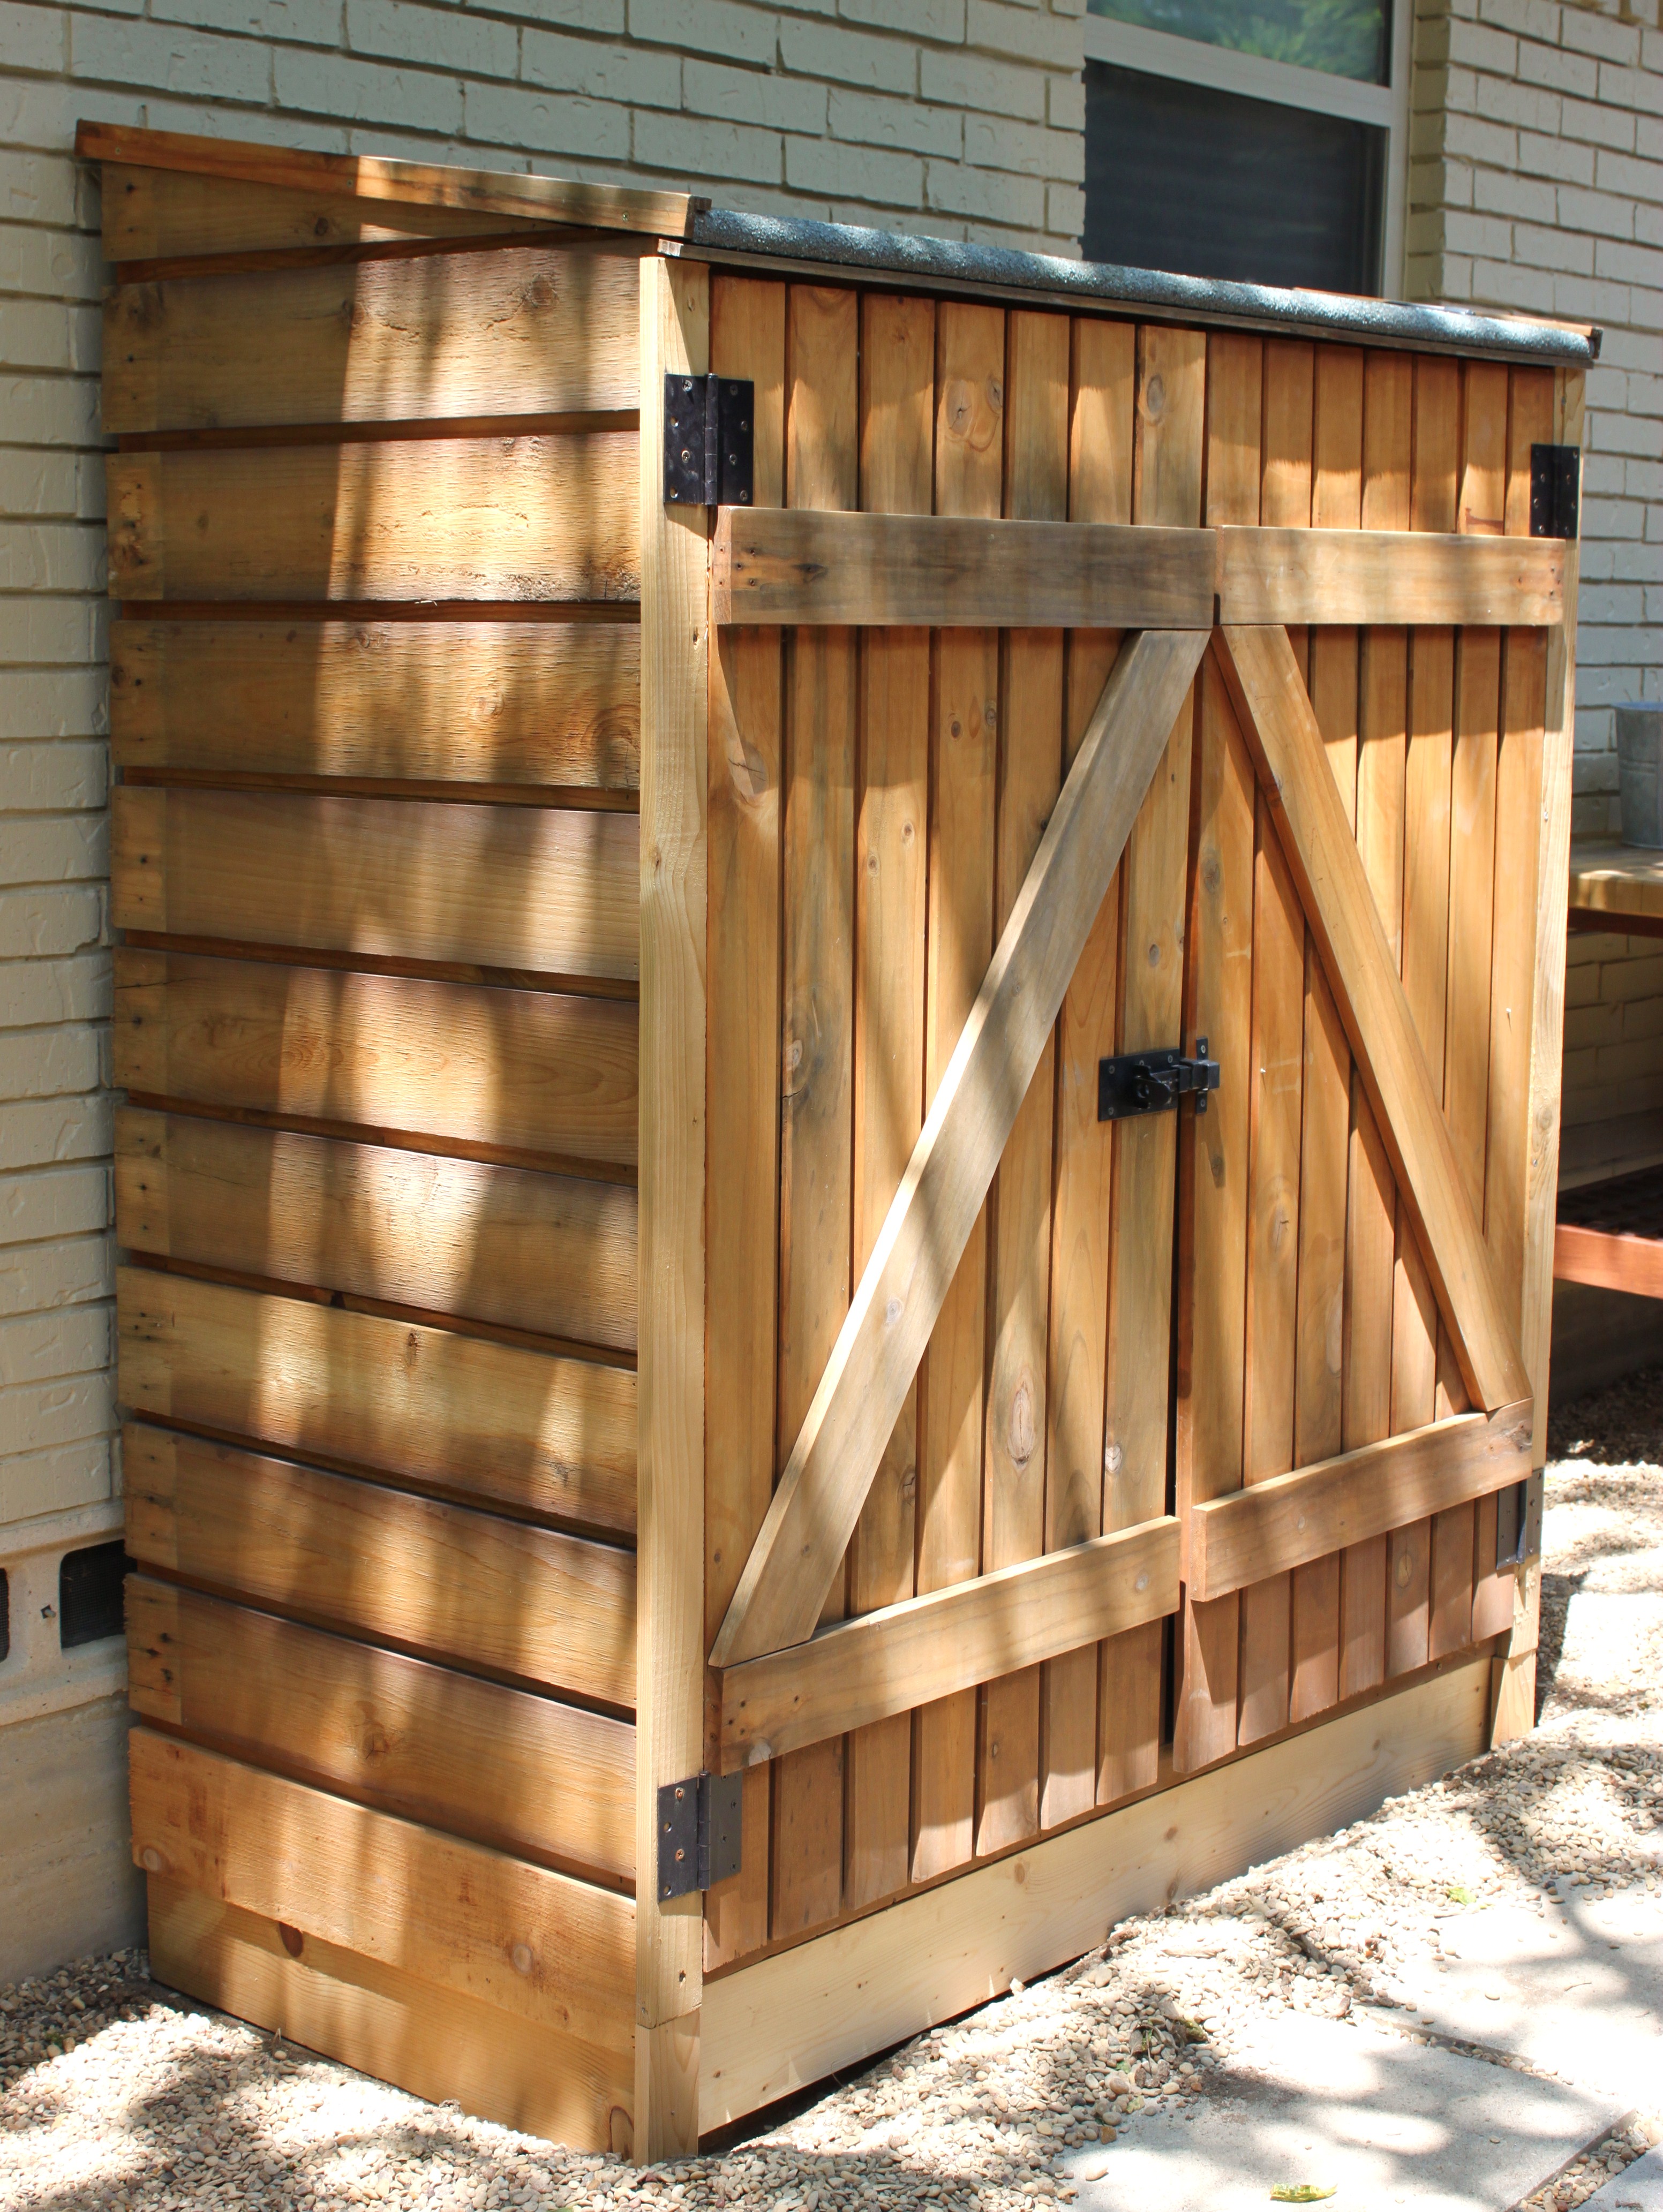 See how the side of the tool shed now mimics the lines of the 